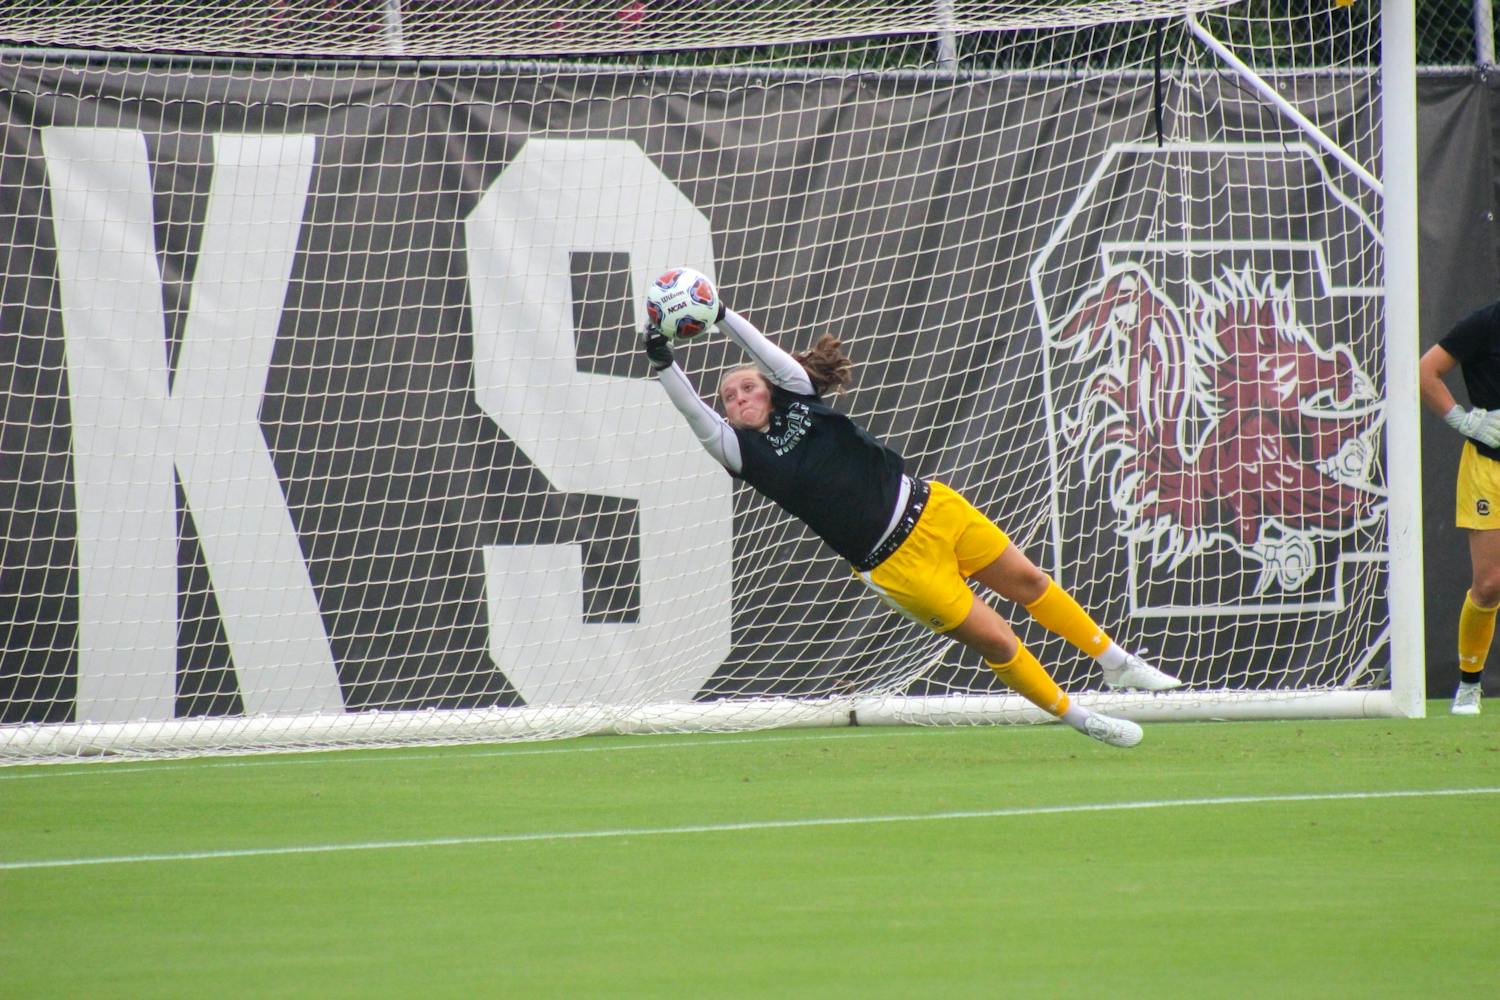 Senior goalkeeper Heather Hinz warming up before the Gamecocks' season opener on August 18, 2022. The No. 4 South Carolina women’s soccer team defeated Connecticut 3-0 in Storrs, Connecticut on Aug. 25.&nbsp;